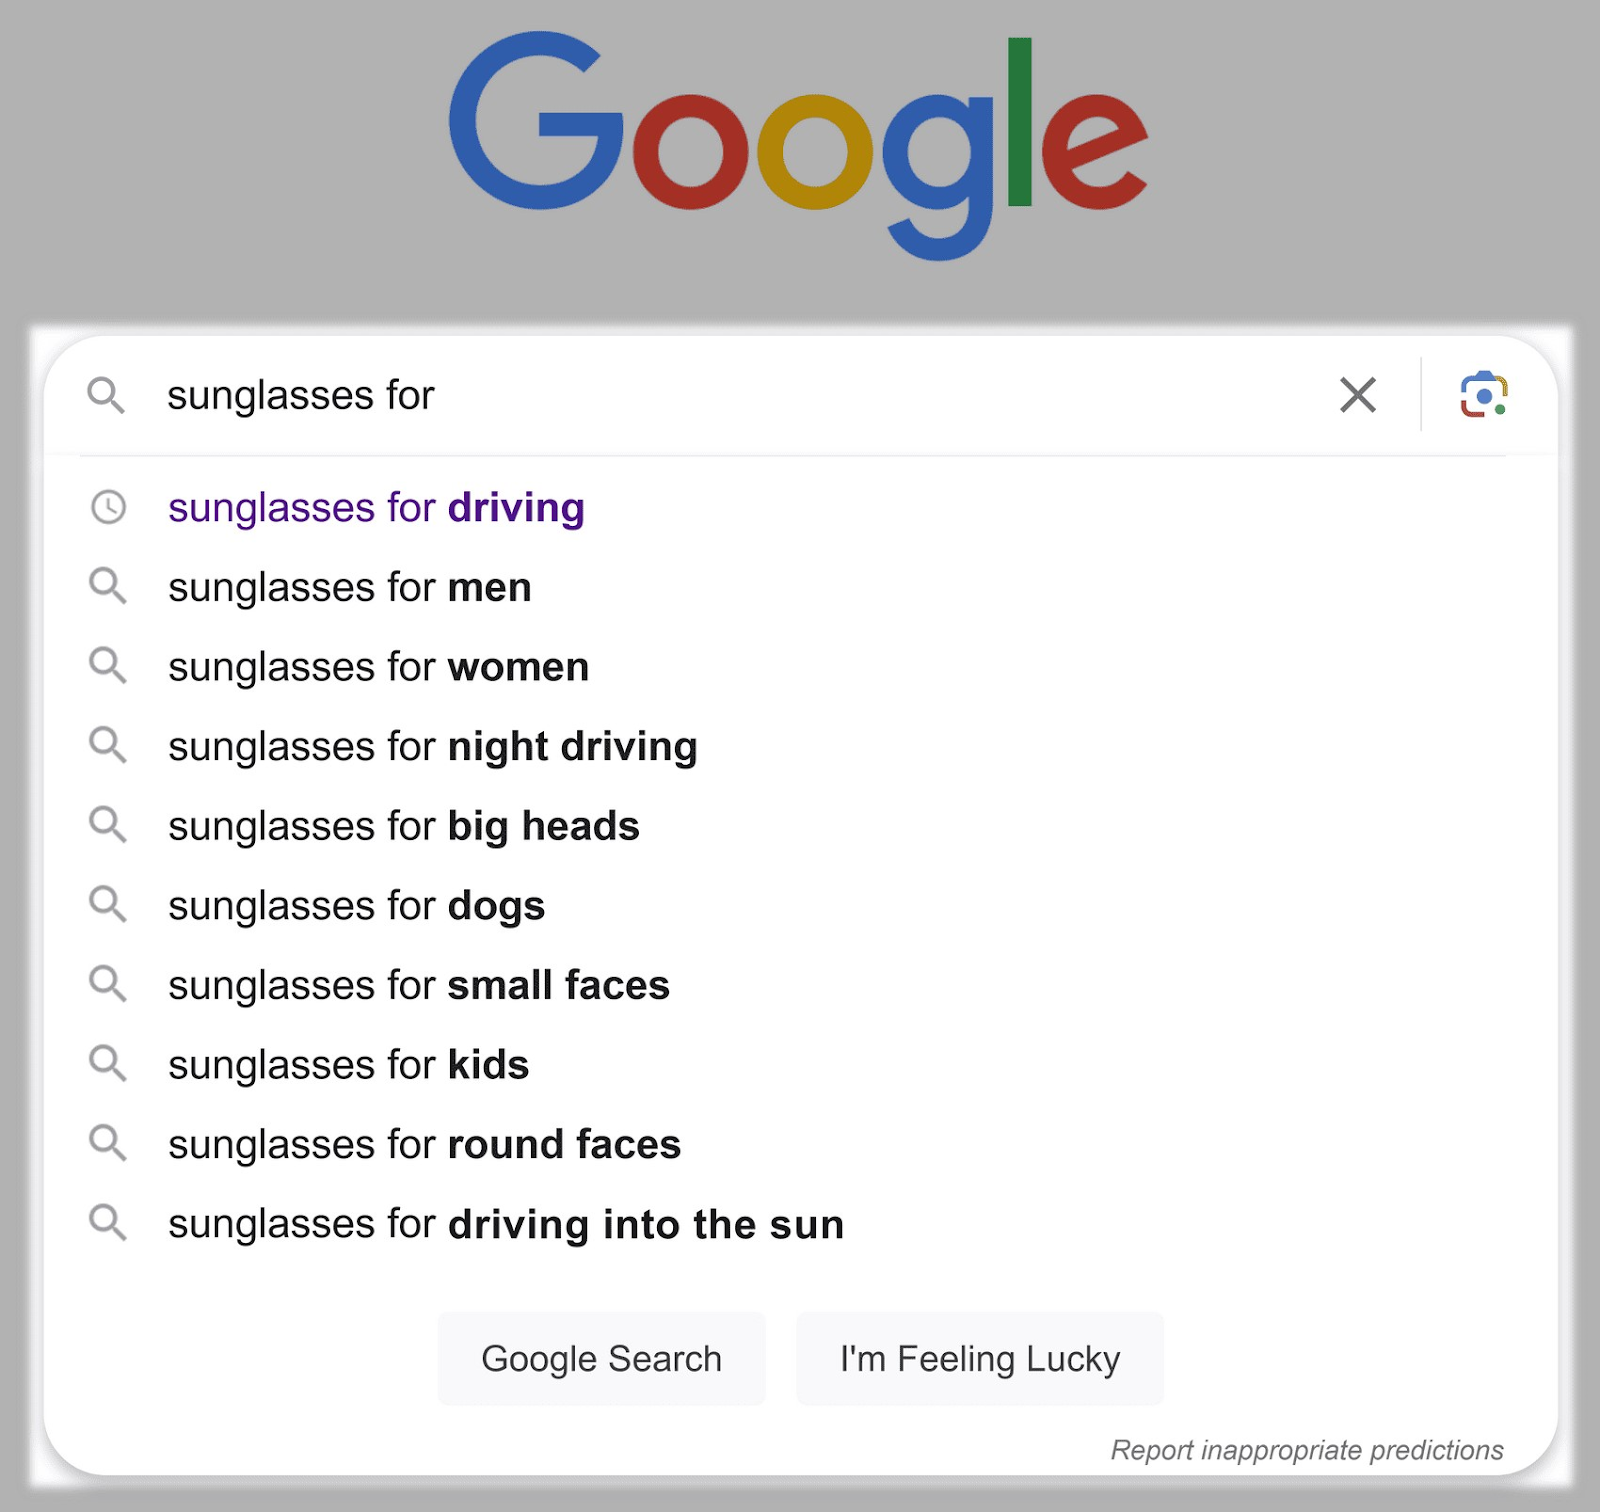 Google autocomplete suggestions when typing “sunglasses for” into the search bar